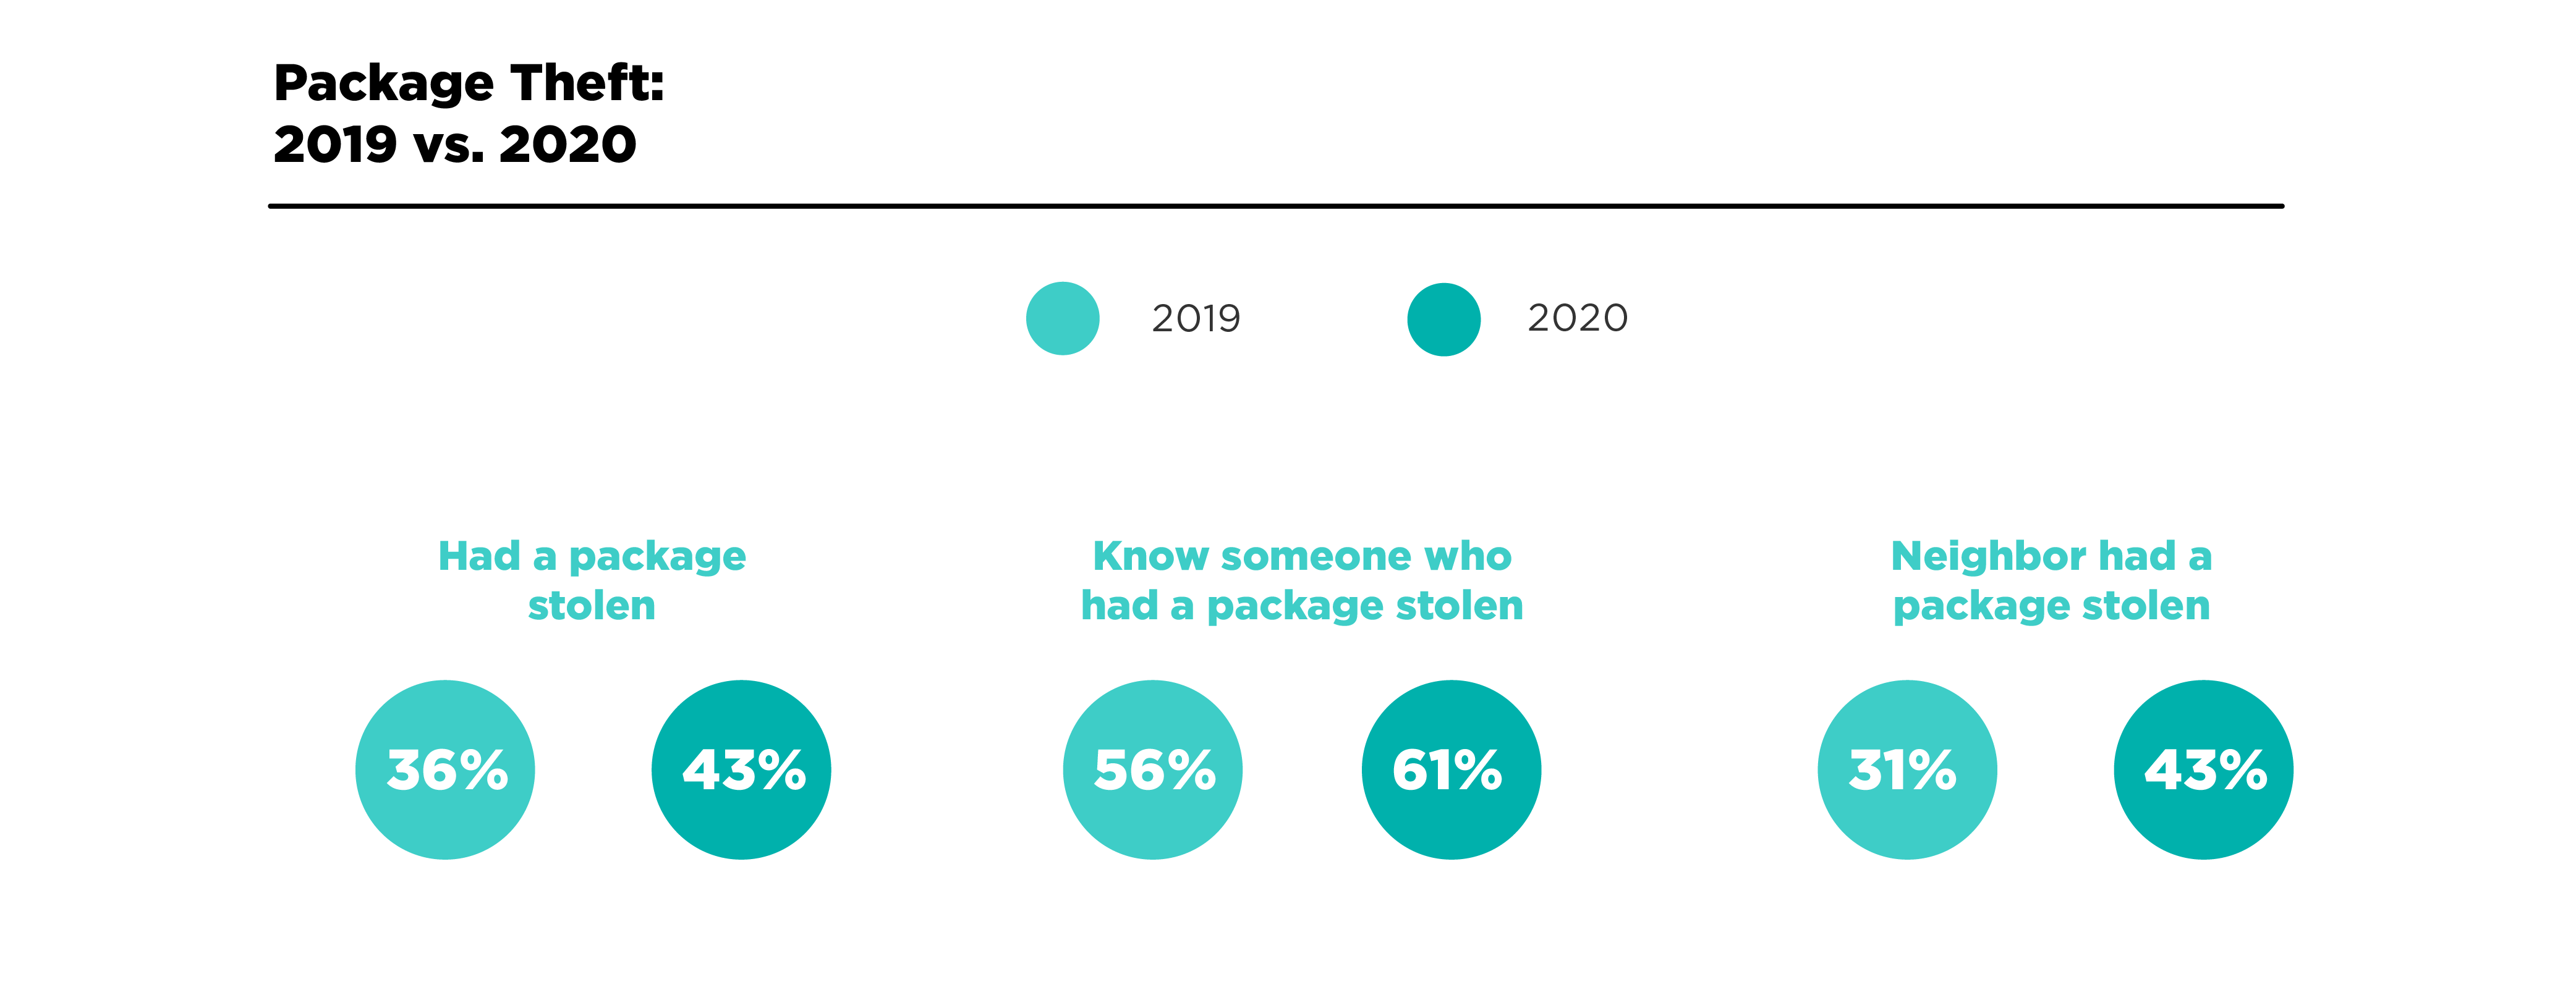 Package Theft Statistics 2020